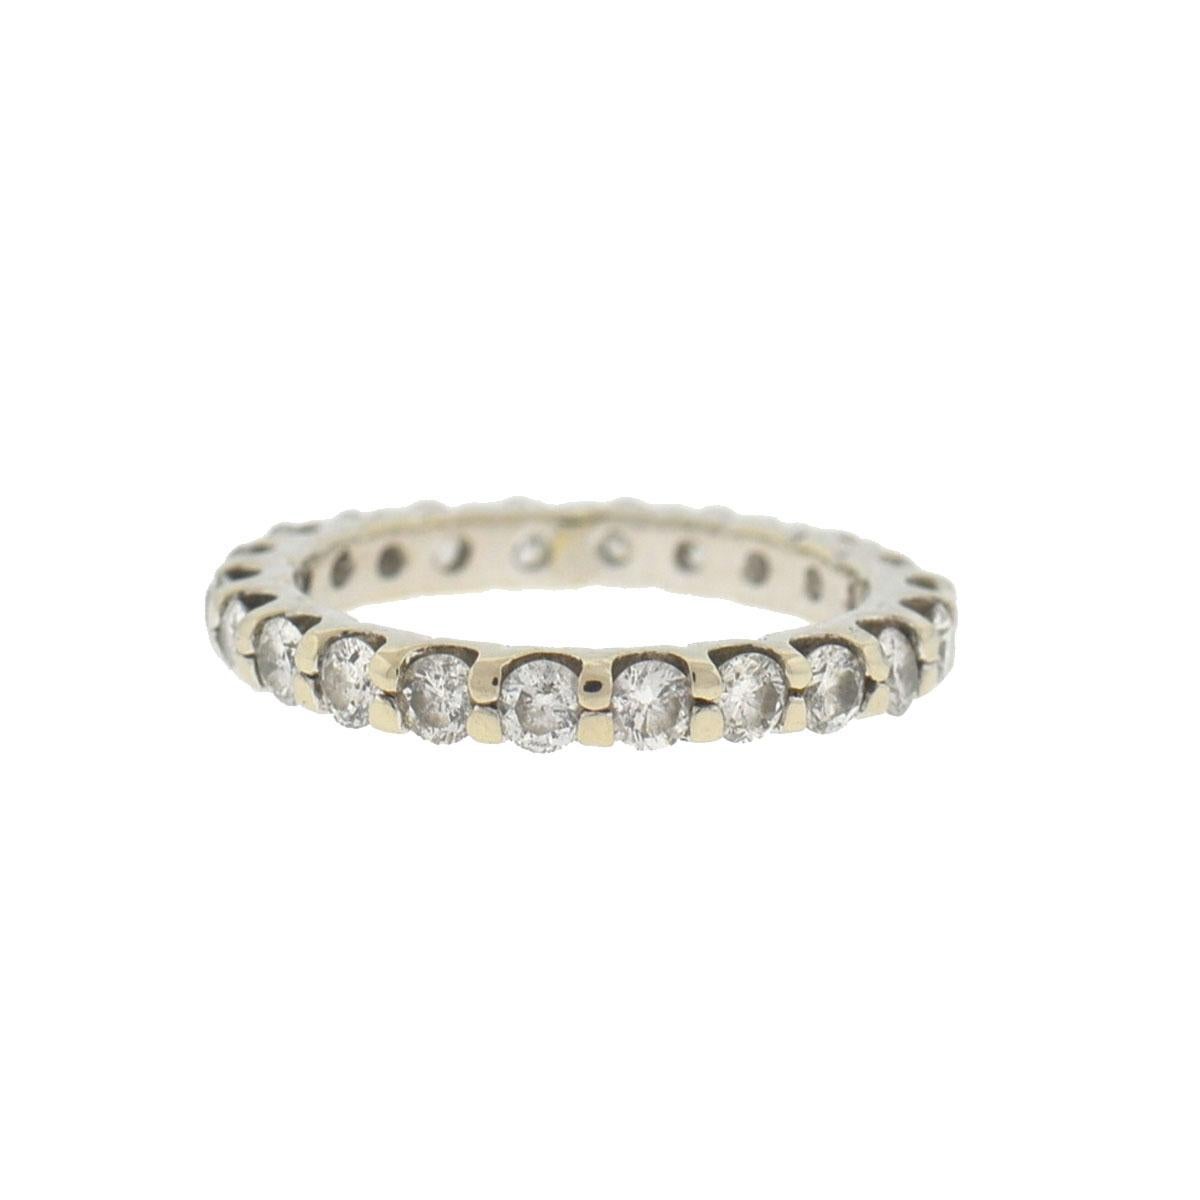 Company-N/A
Style-Diamond Band Ring
Metal-14k White Gold 
Size-4.5
Weight -2.17 grams
Stones-Diamonds approx. 1.1cts tw
SKU-9210-2UEE